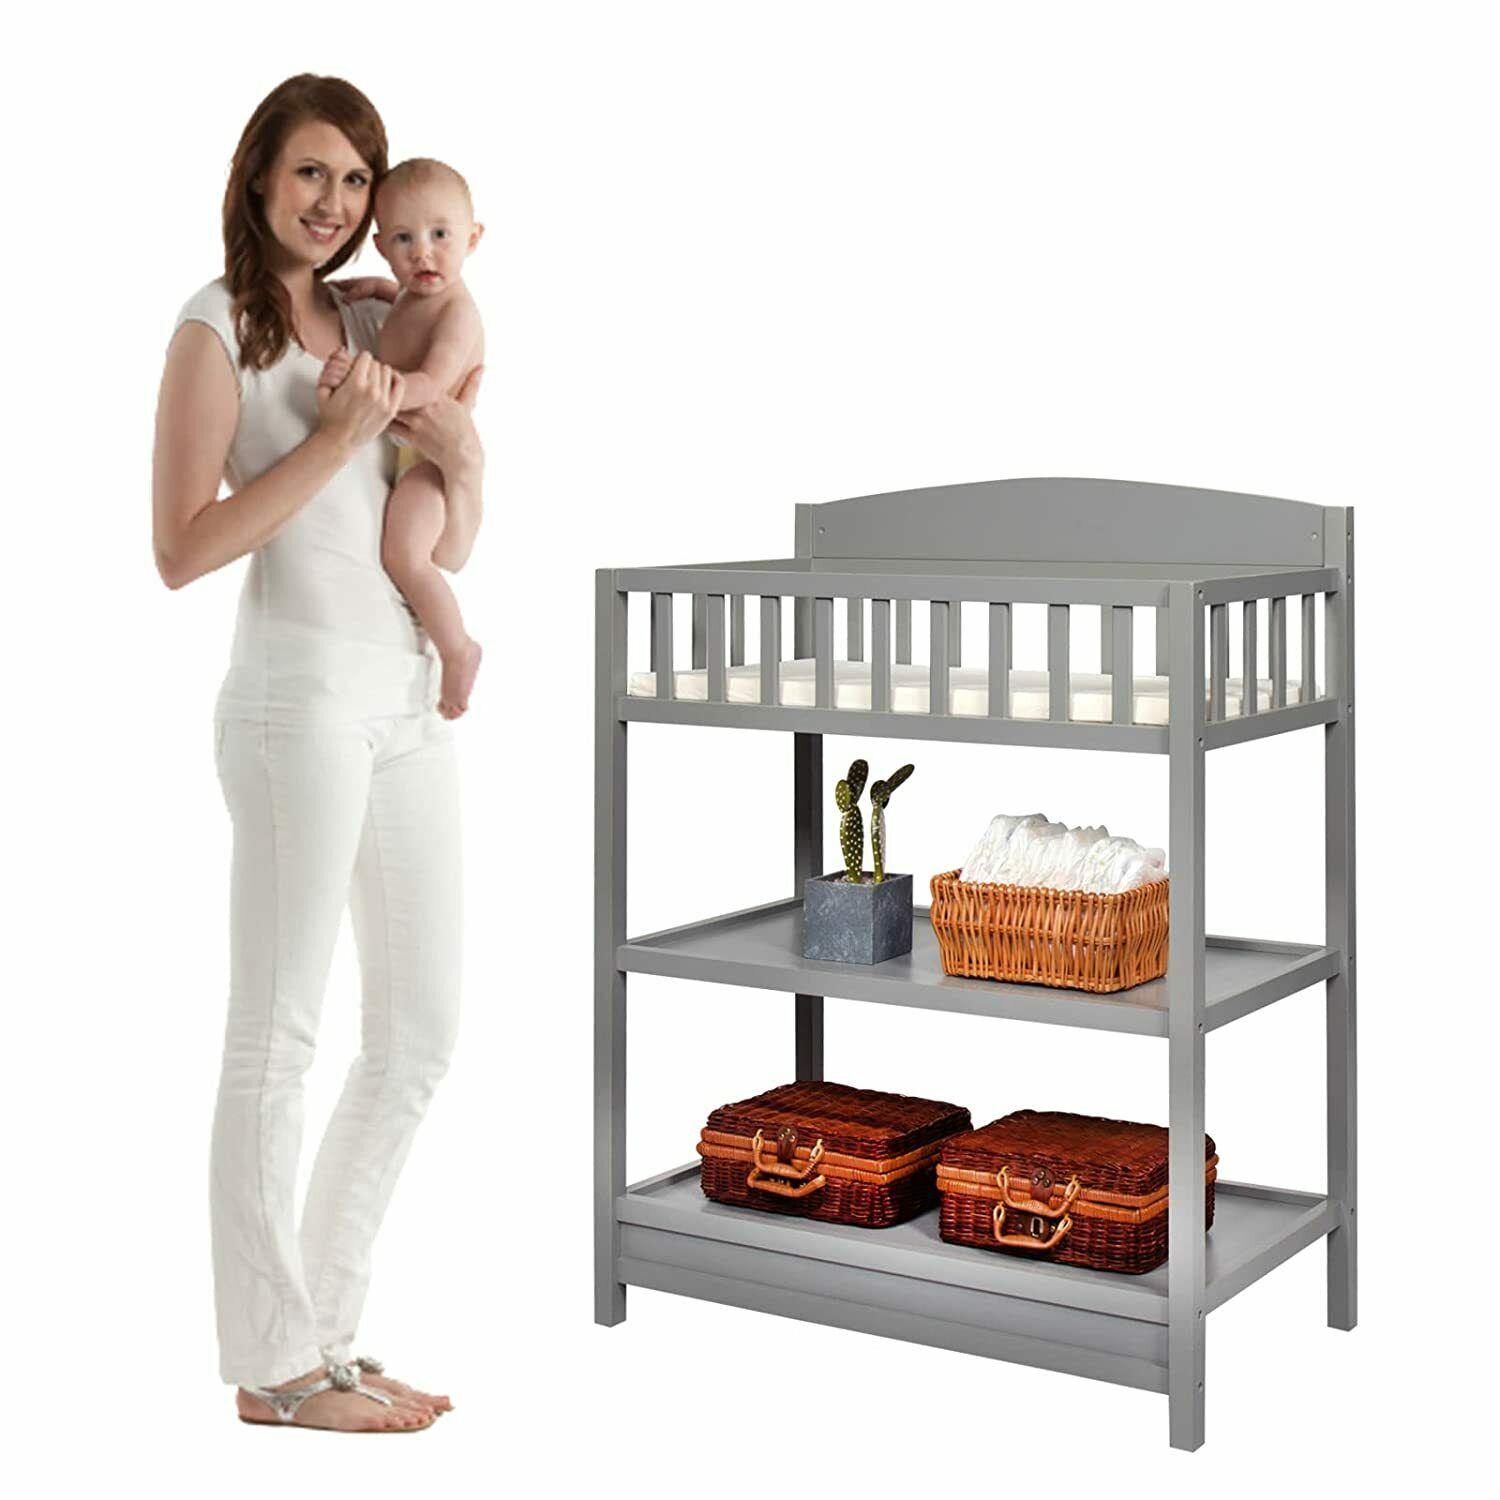 Baby Changing Table w/ Pad Diaper Station Organizer Nursery Furniture Grey